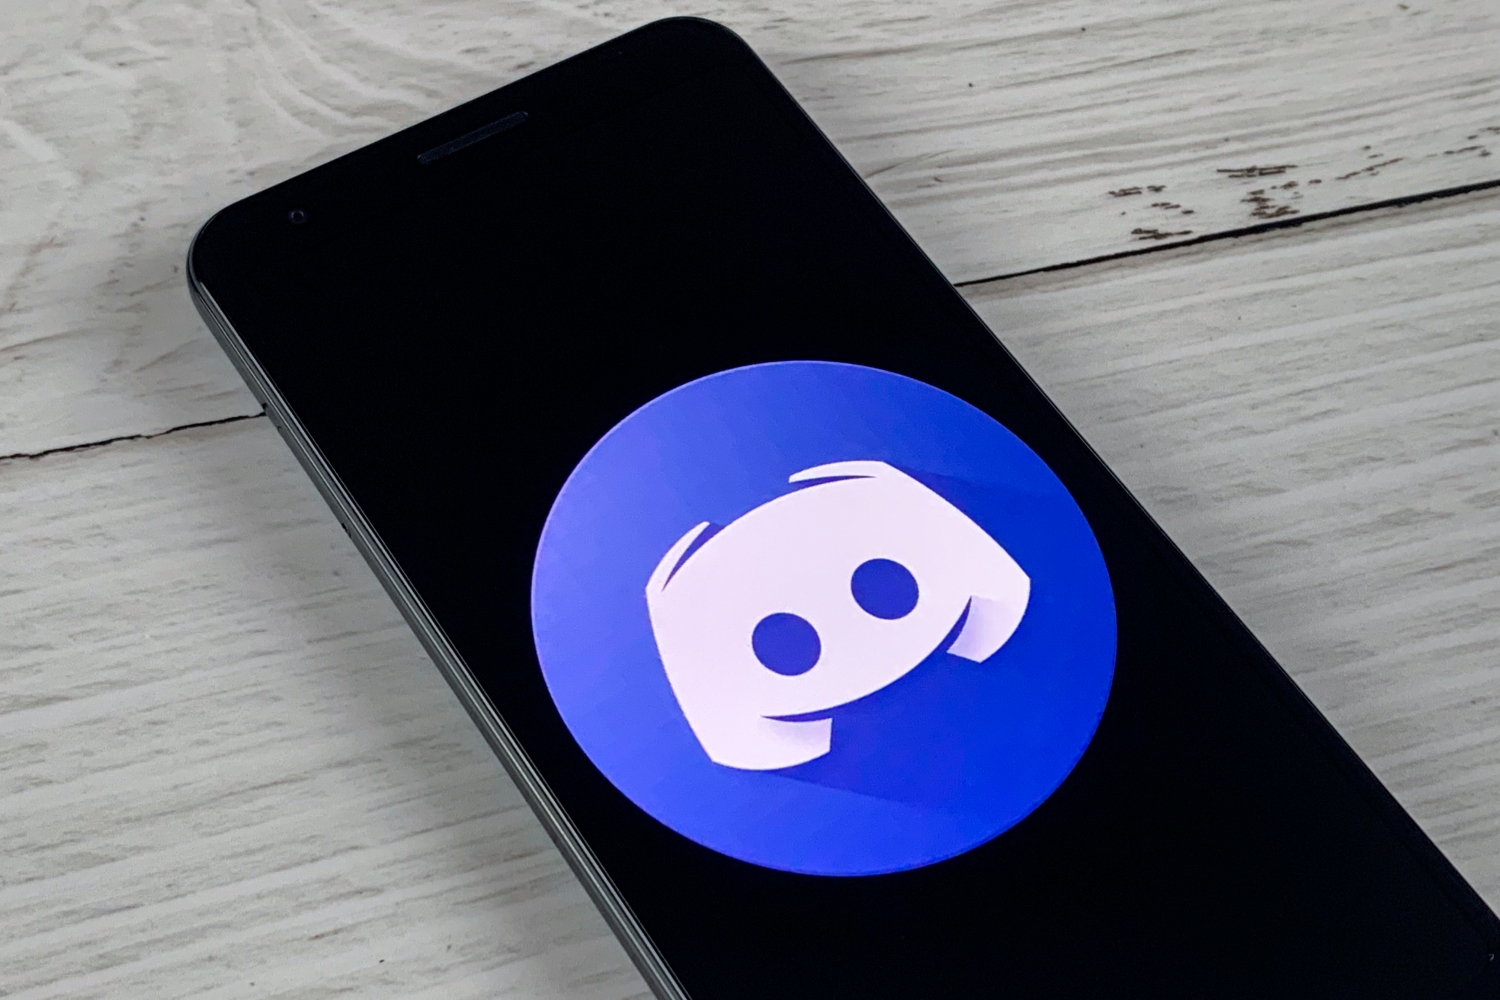 Discord is 'rebranding' to appeal to more than just gamers